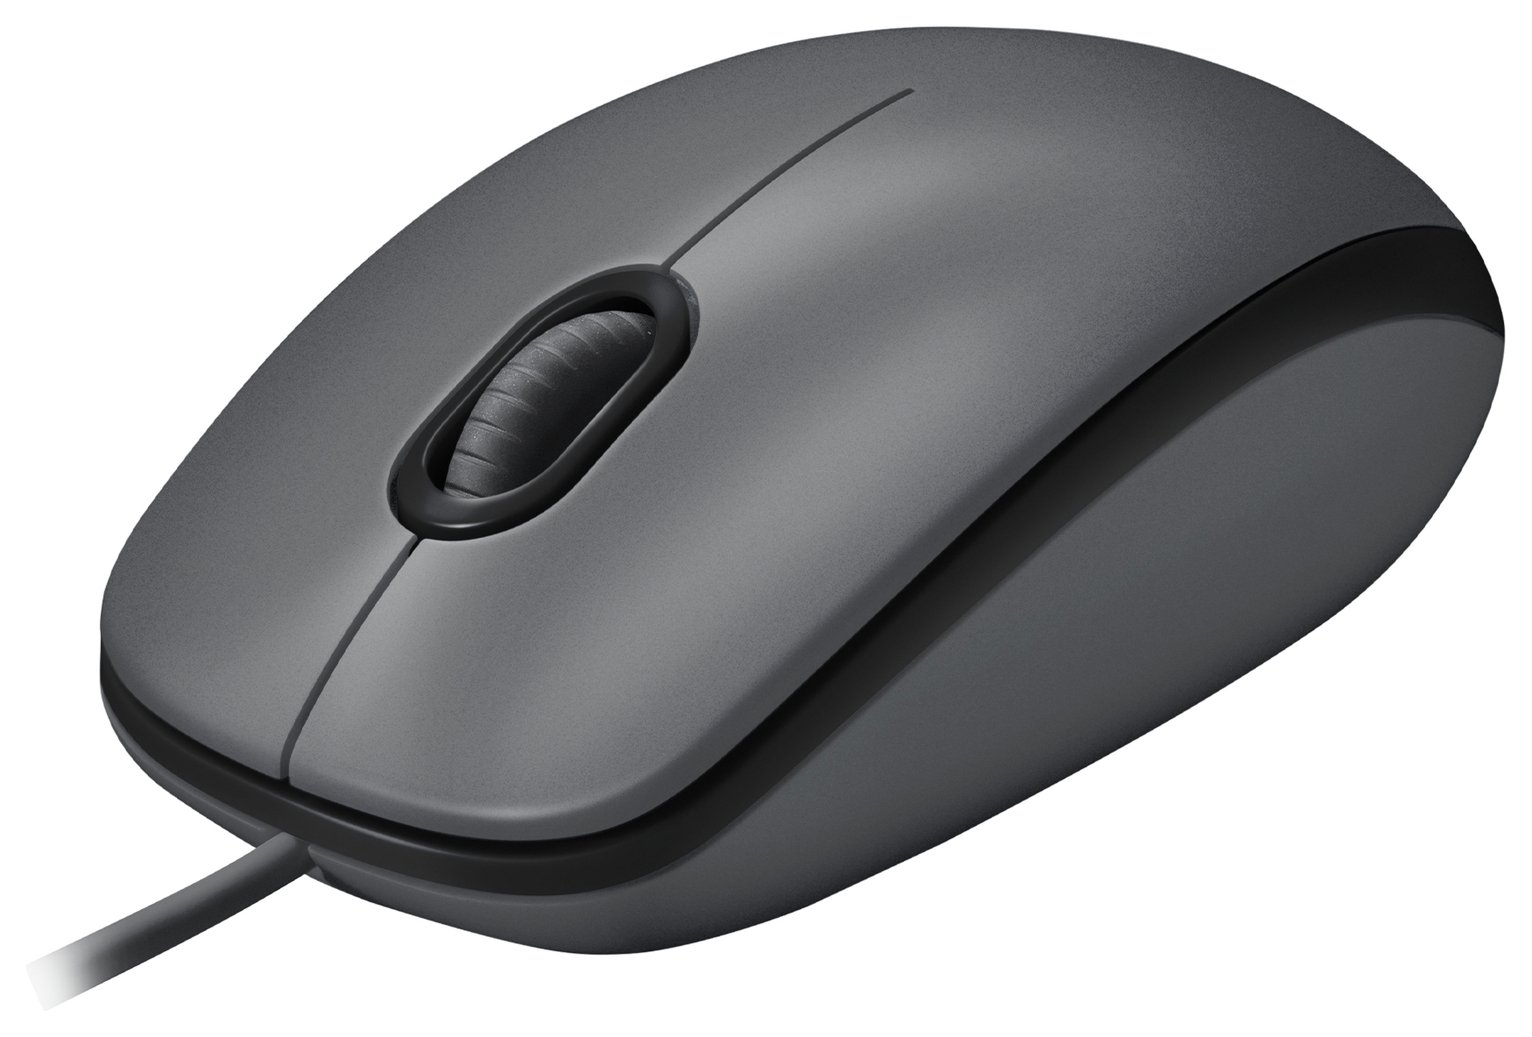 Logitech M100 Wired Mouse - Black